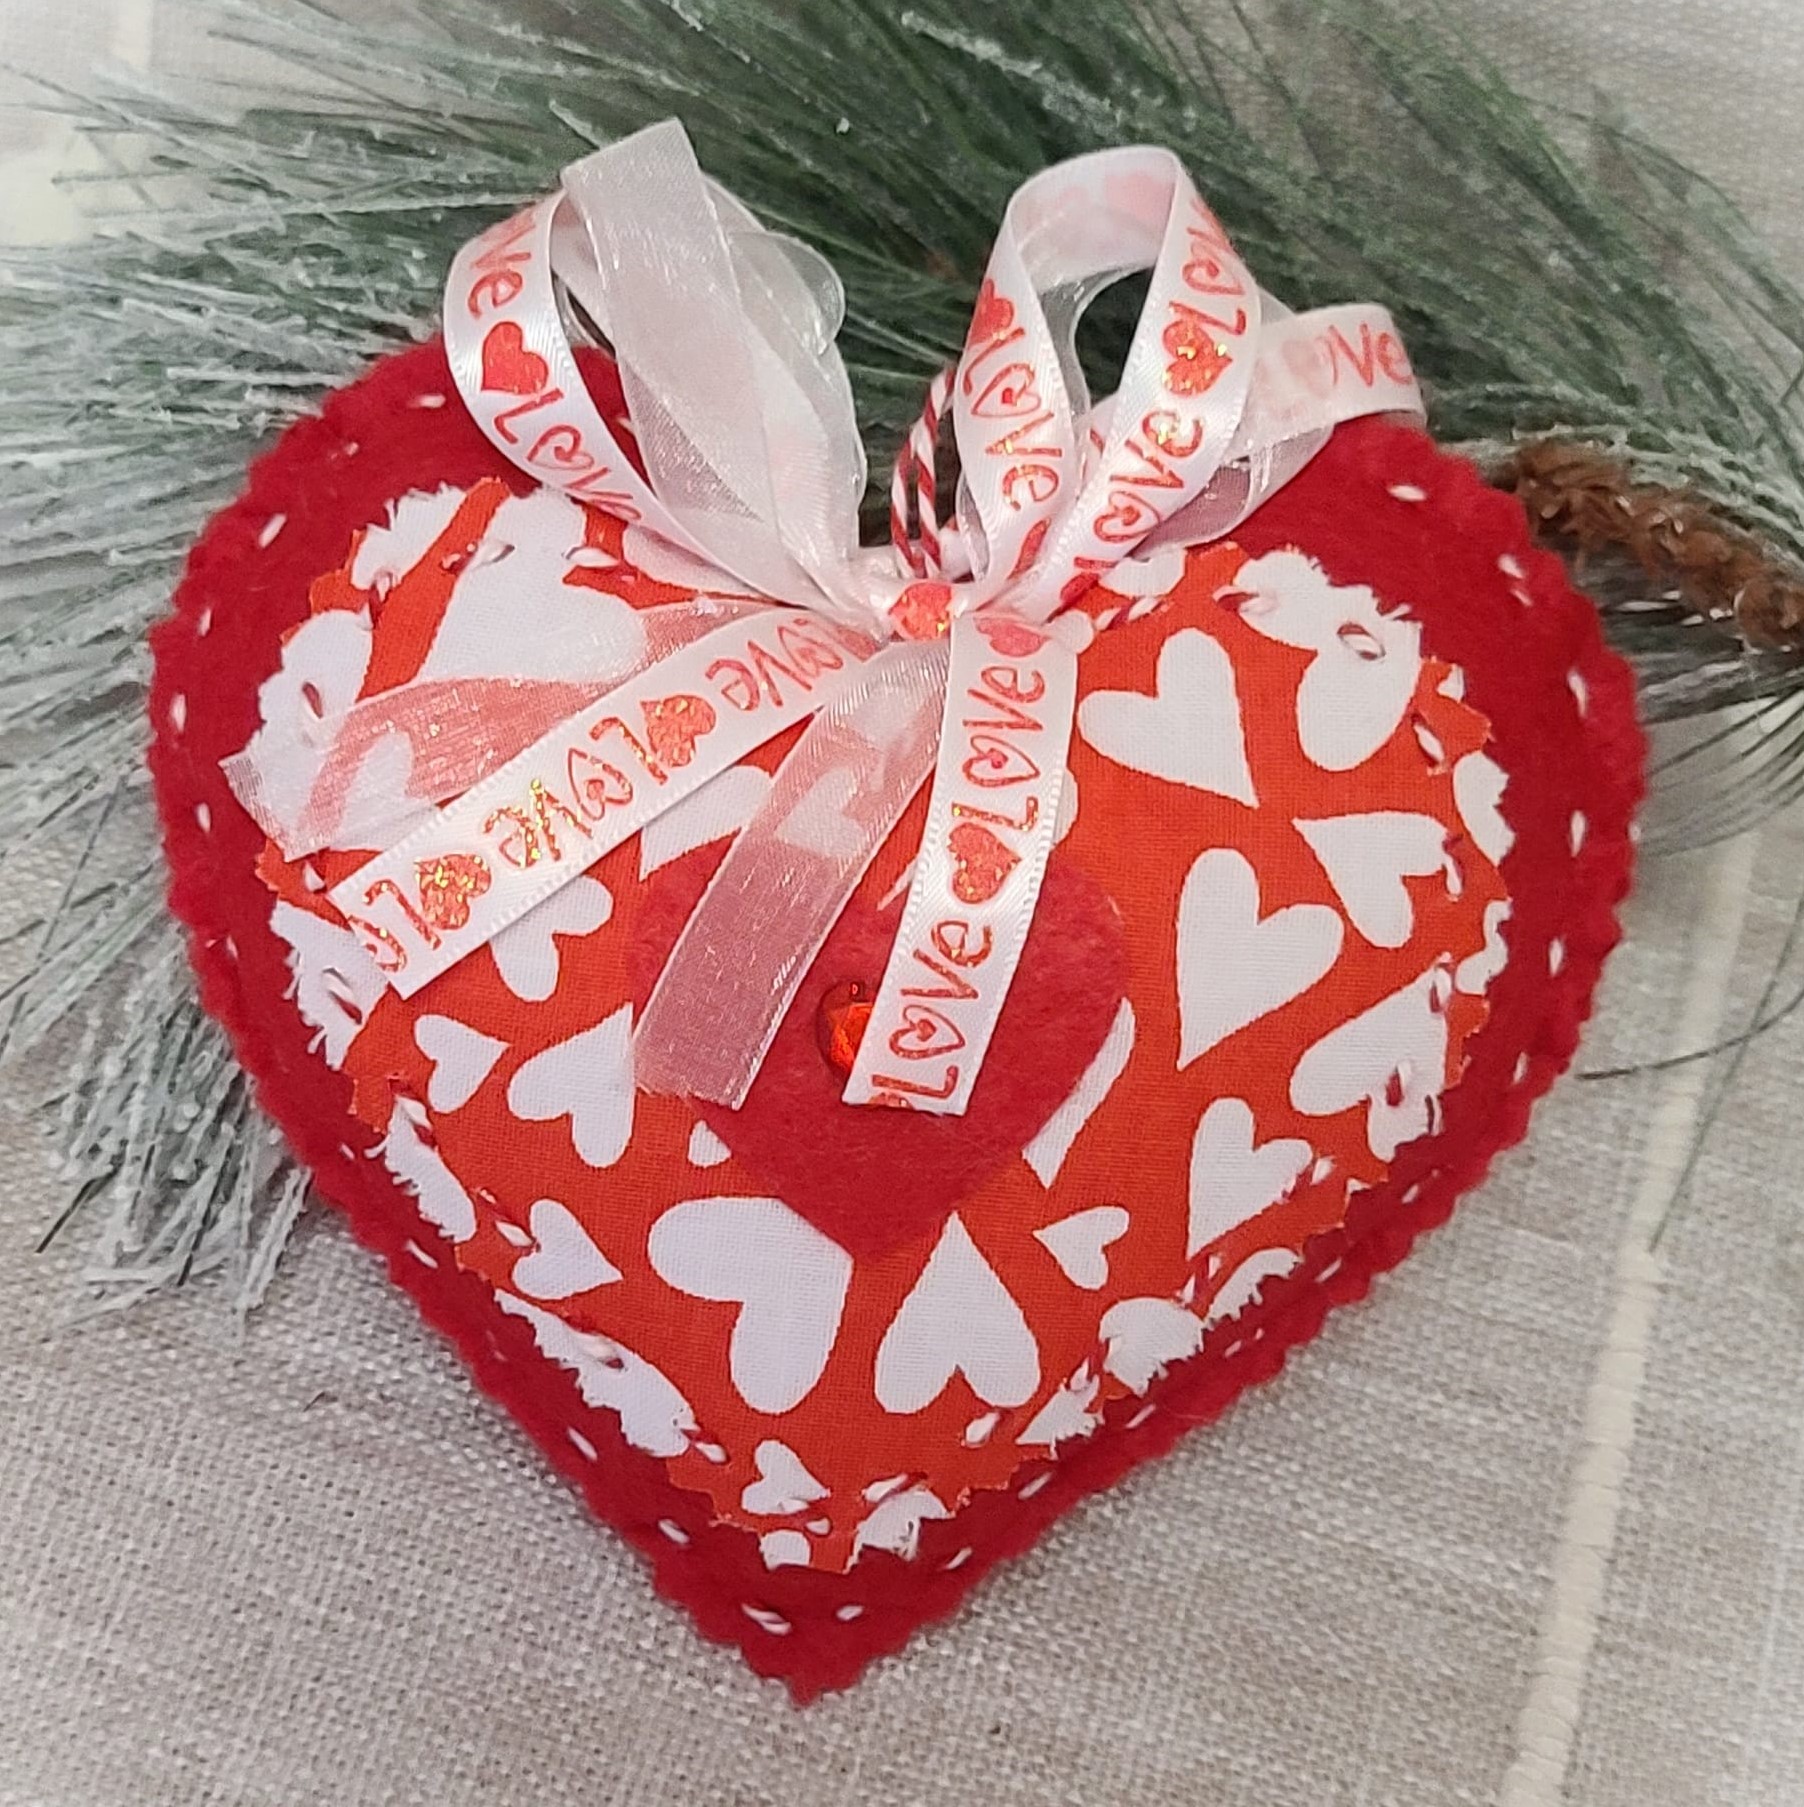 Felt and fabric love valentines heart ornament or bowl filler